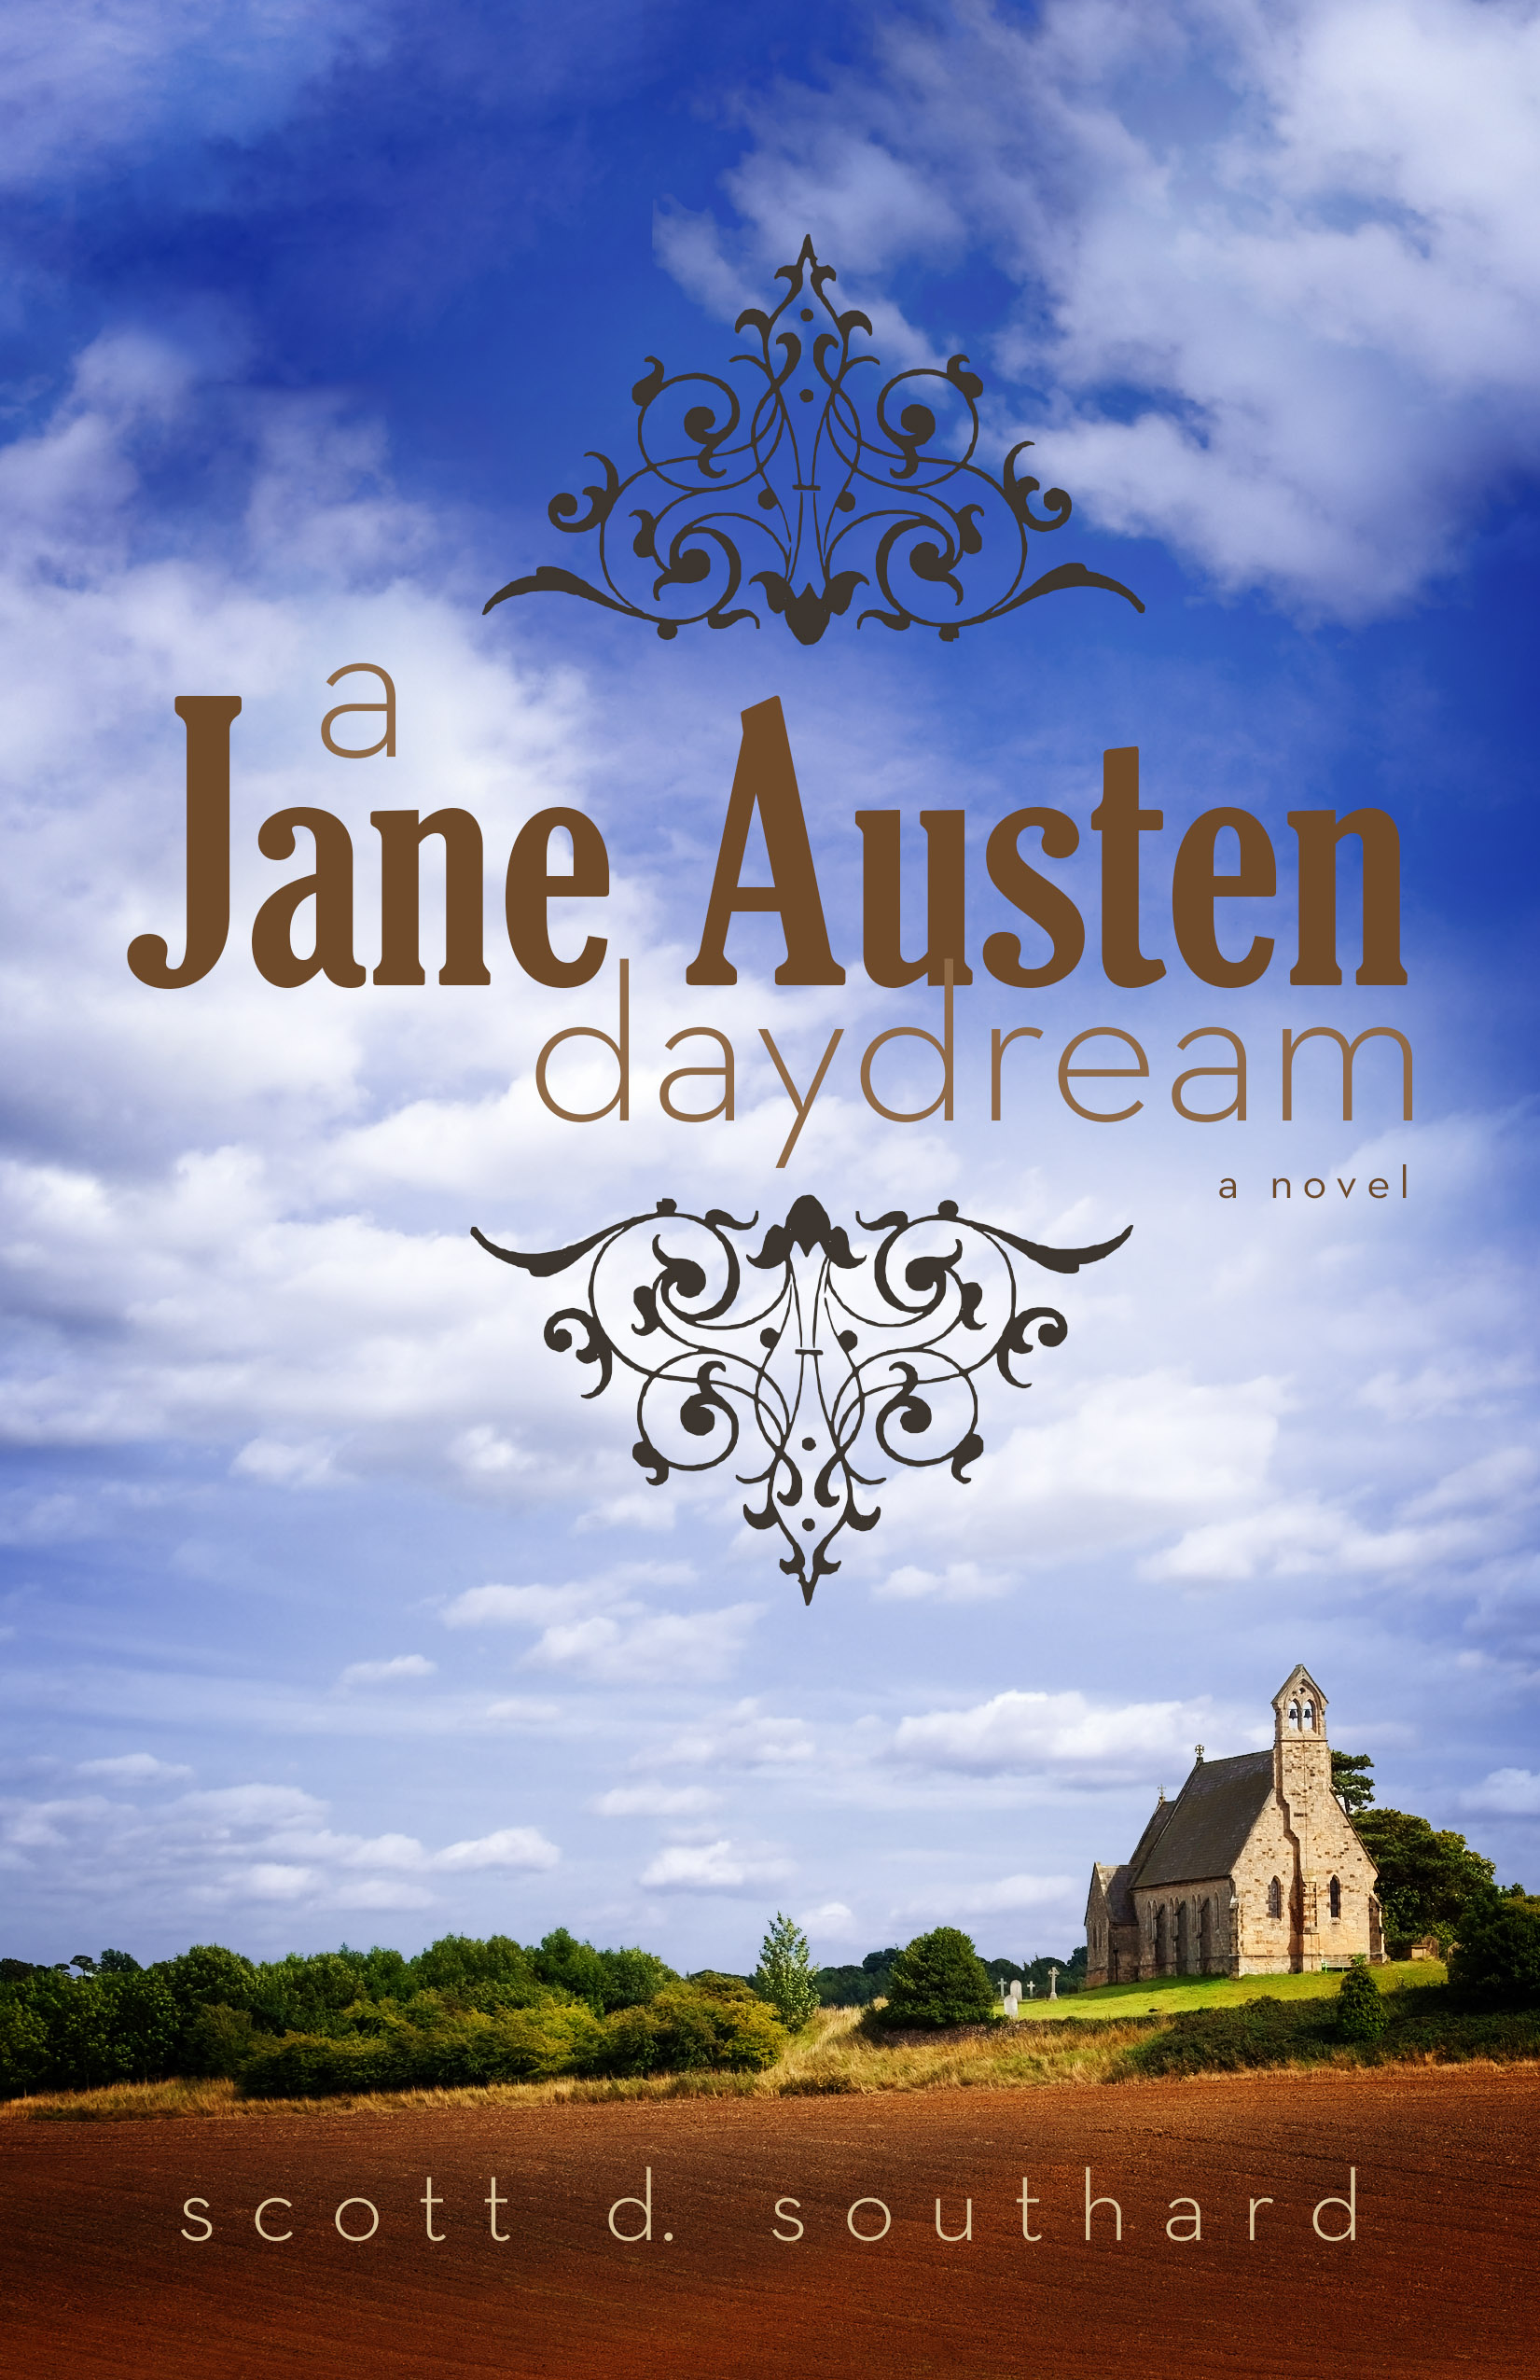 Valentine's Day: A History - Jane Austen articles and blog